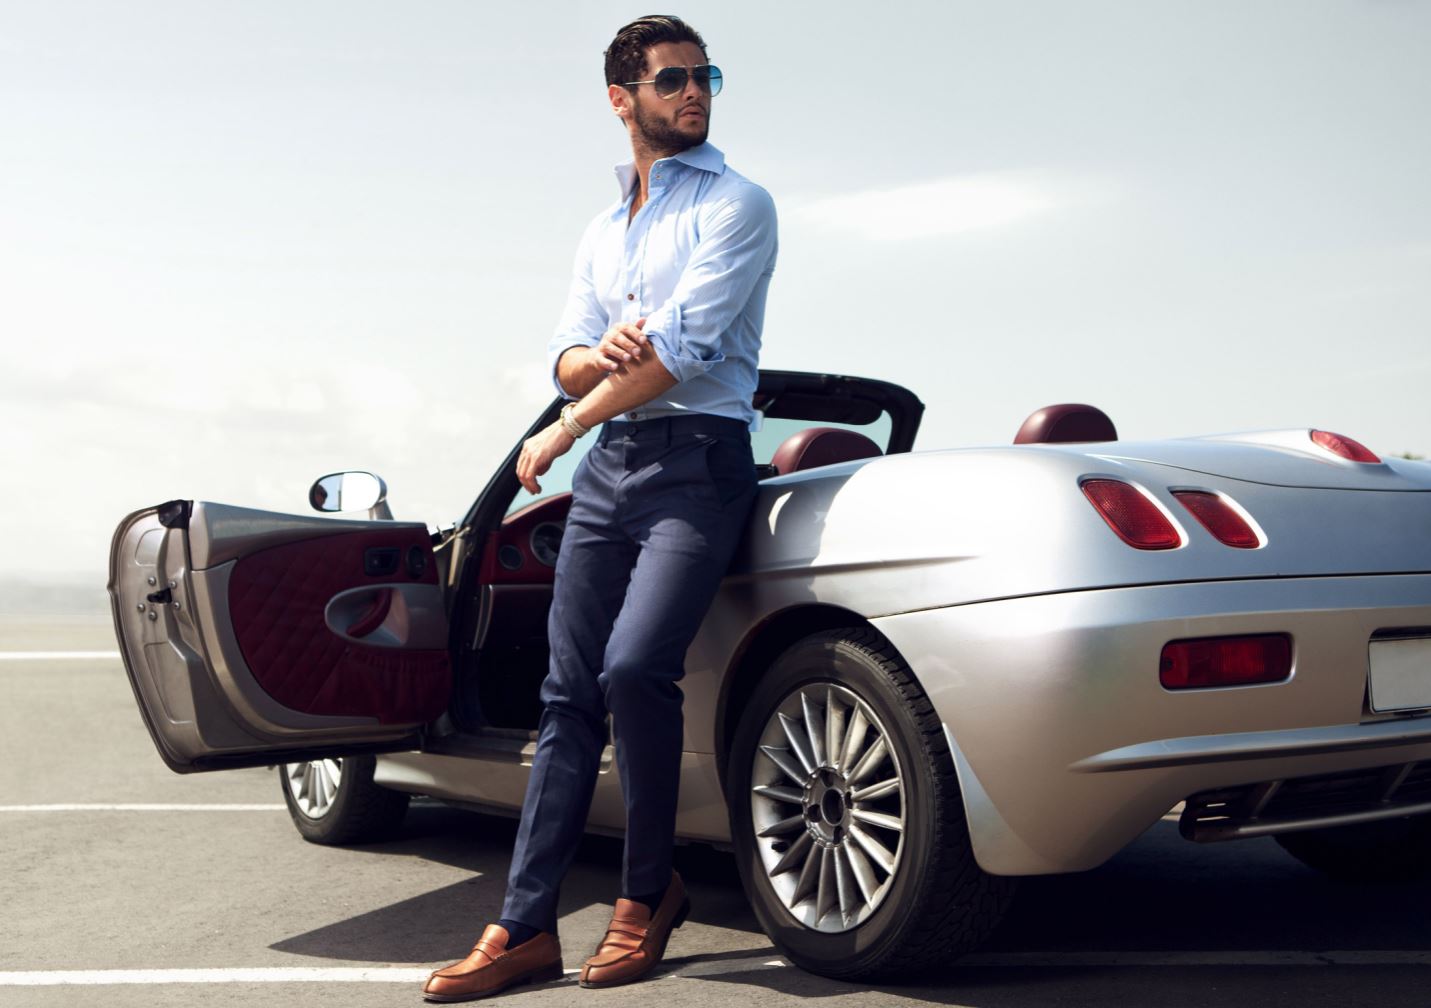 Luxury Car Leasing: The 4 Most Desirable Cars To Lease